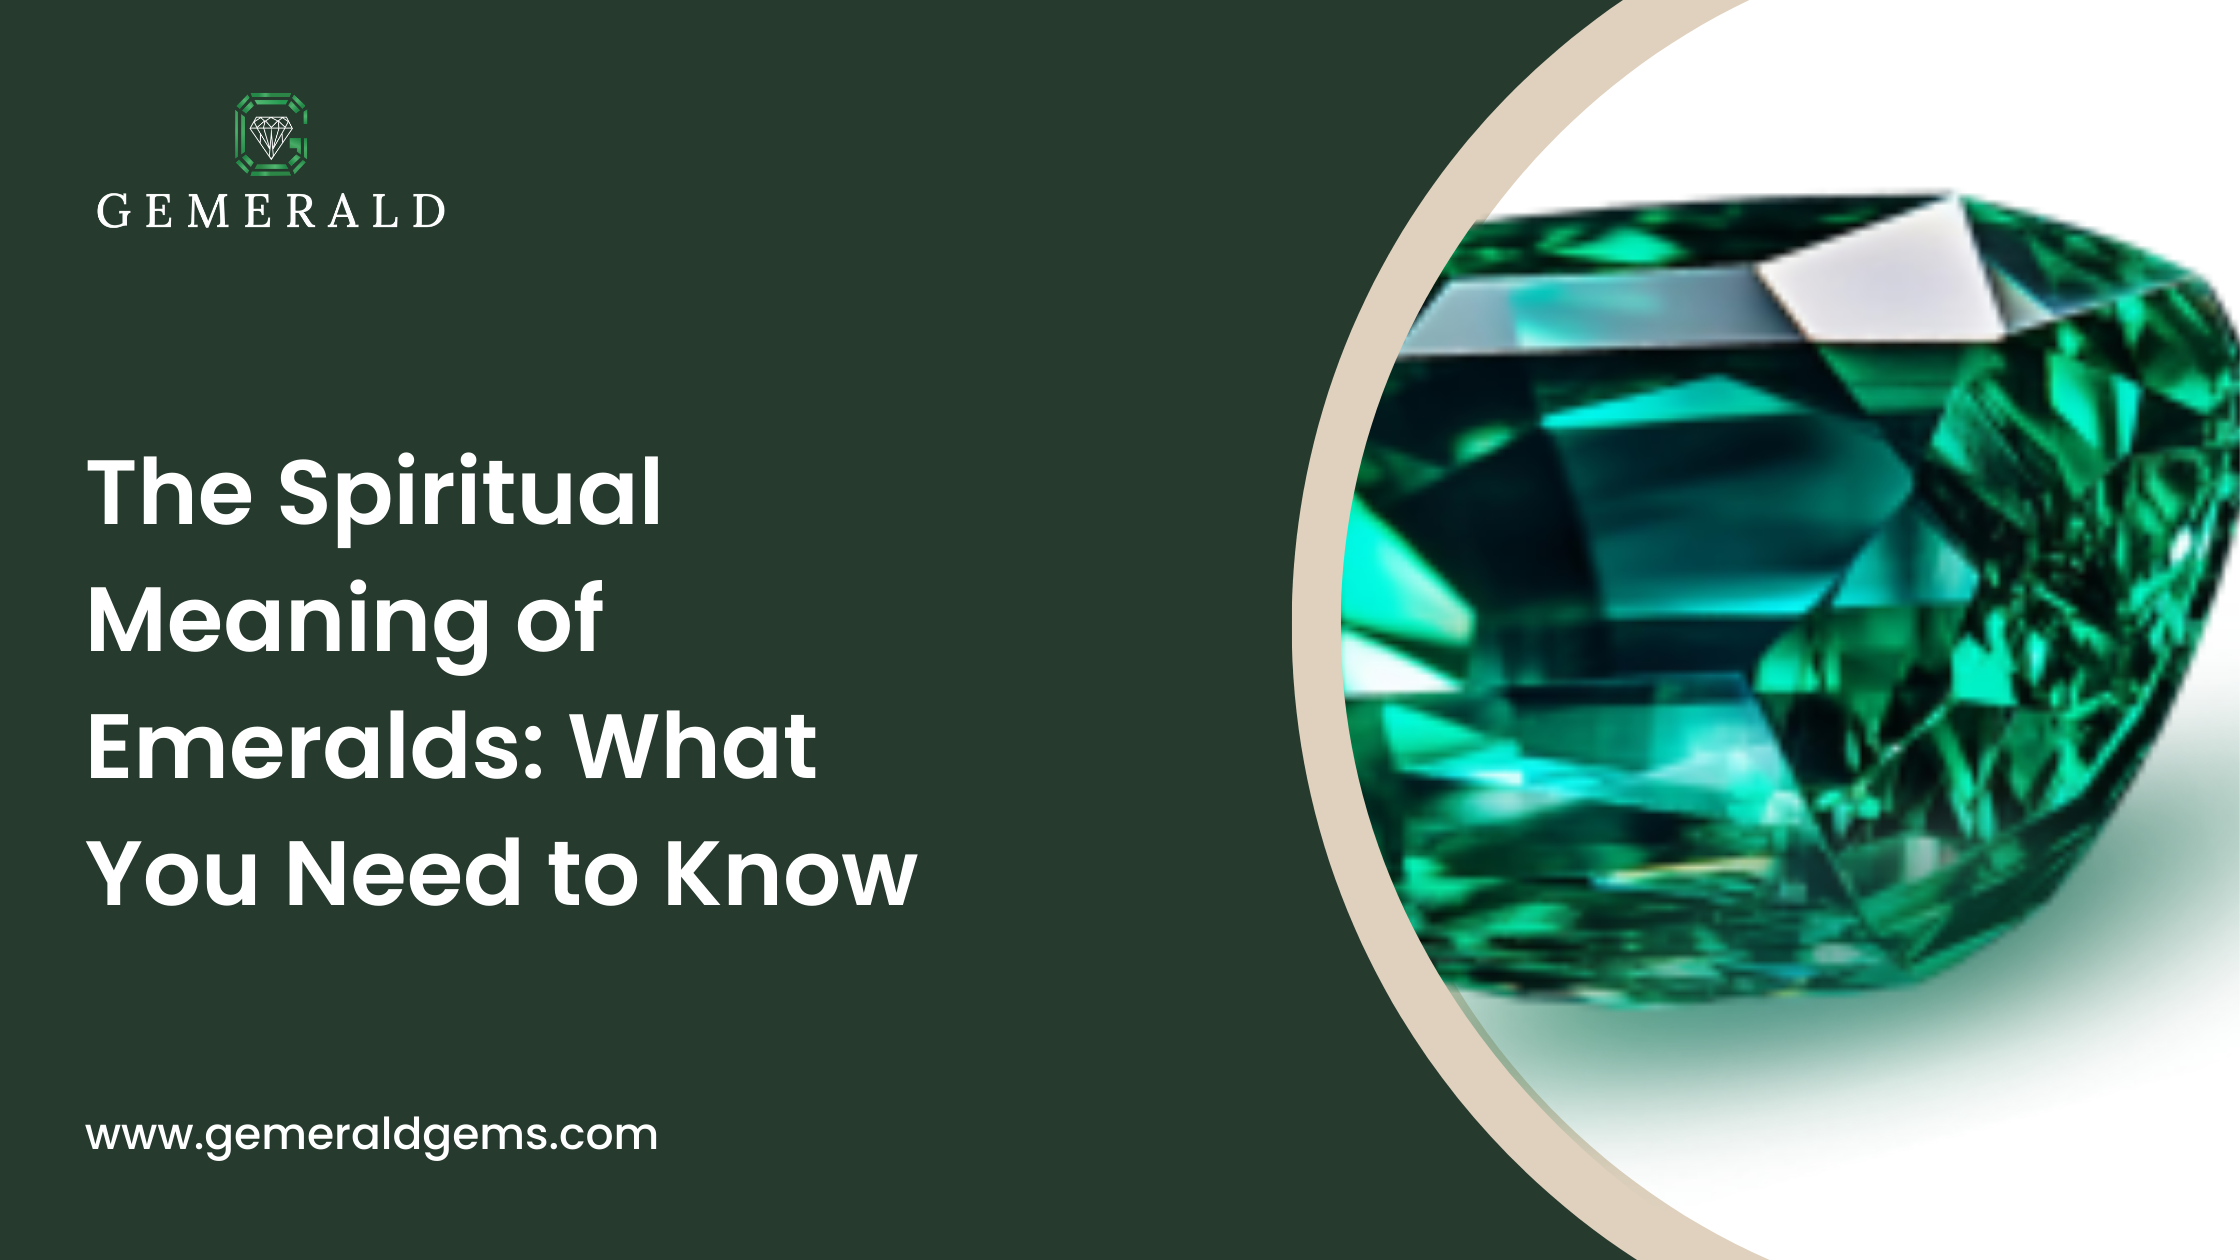 The Spiritual Meaning of Emeralds: What You Need to Know